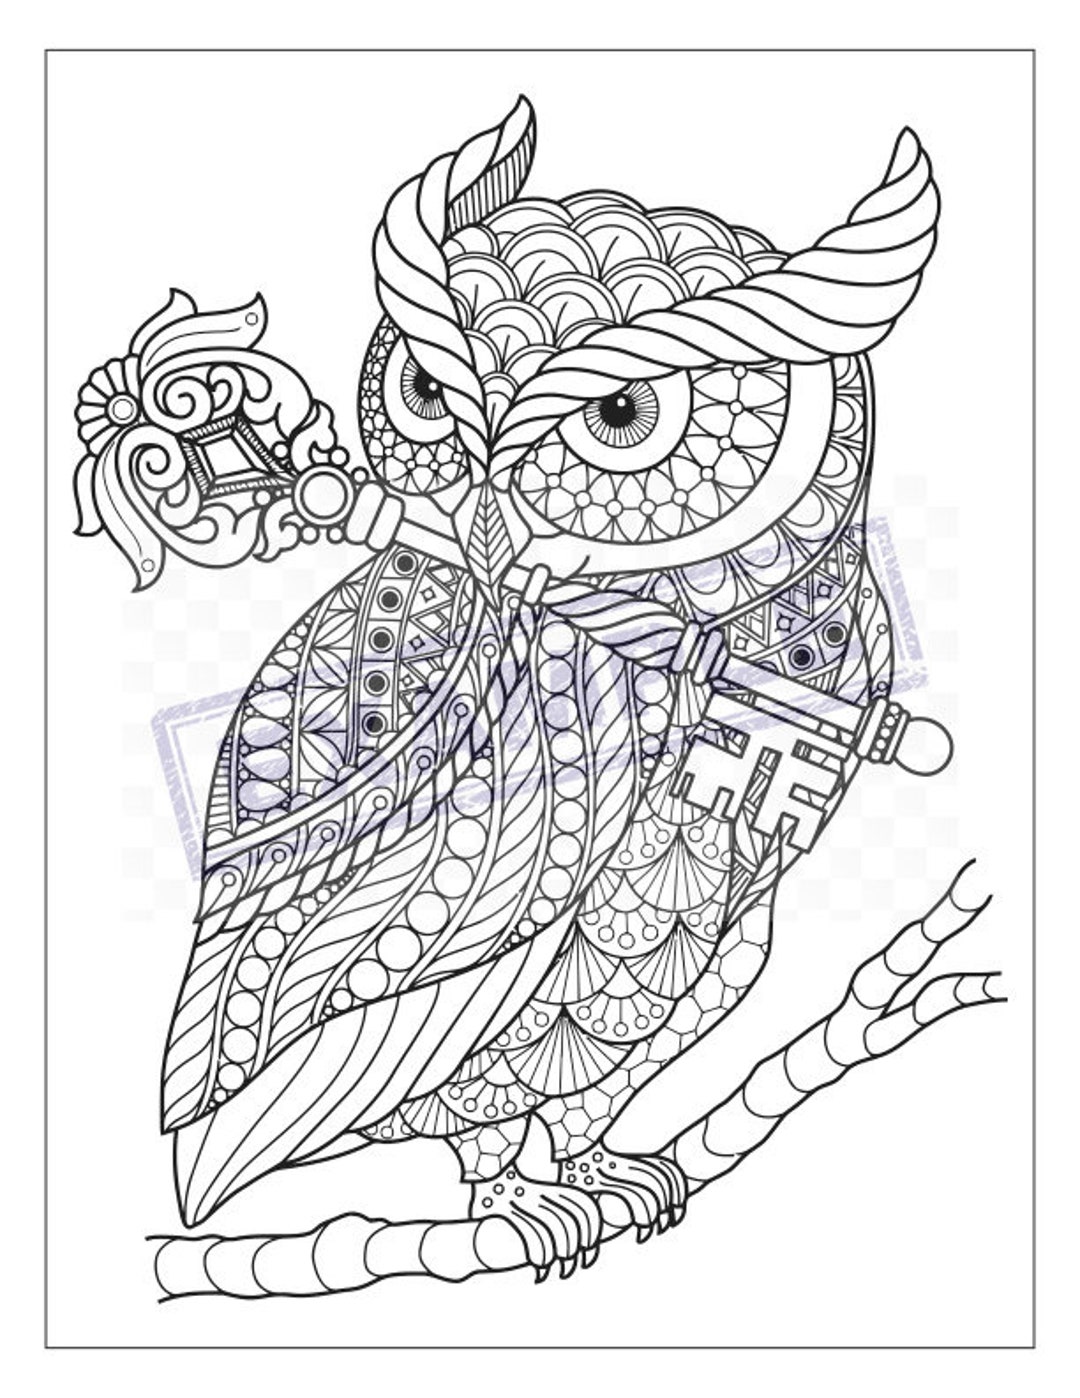 10+ Fun & Free Adult Coloring Pages